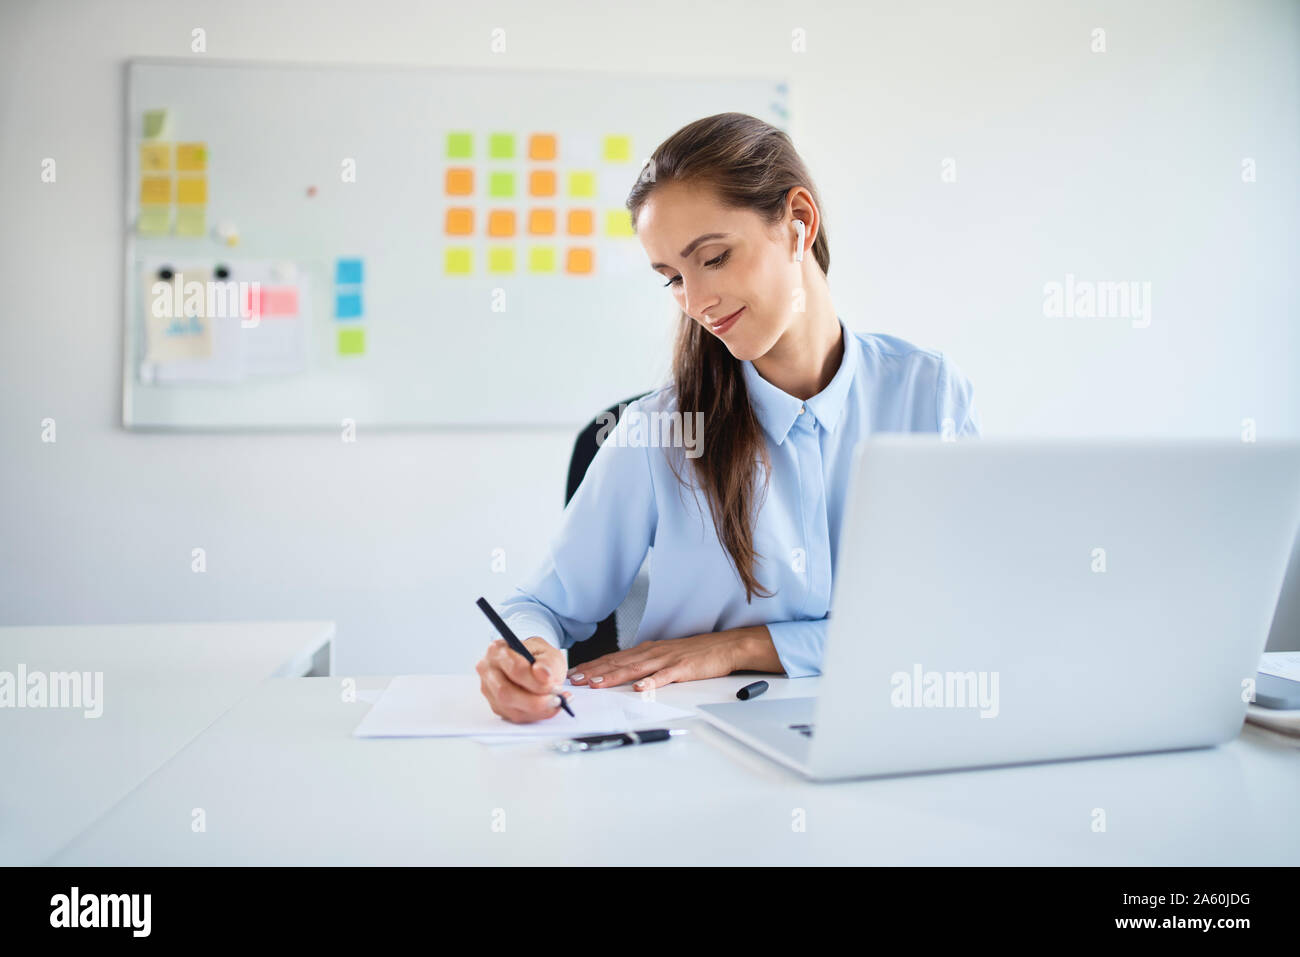 Young businesswoman preparing business documents while working with laptop in office Stock Photo